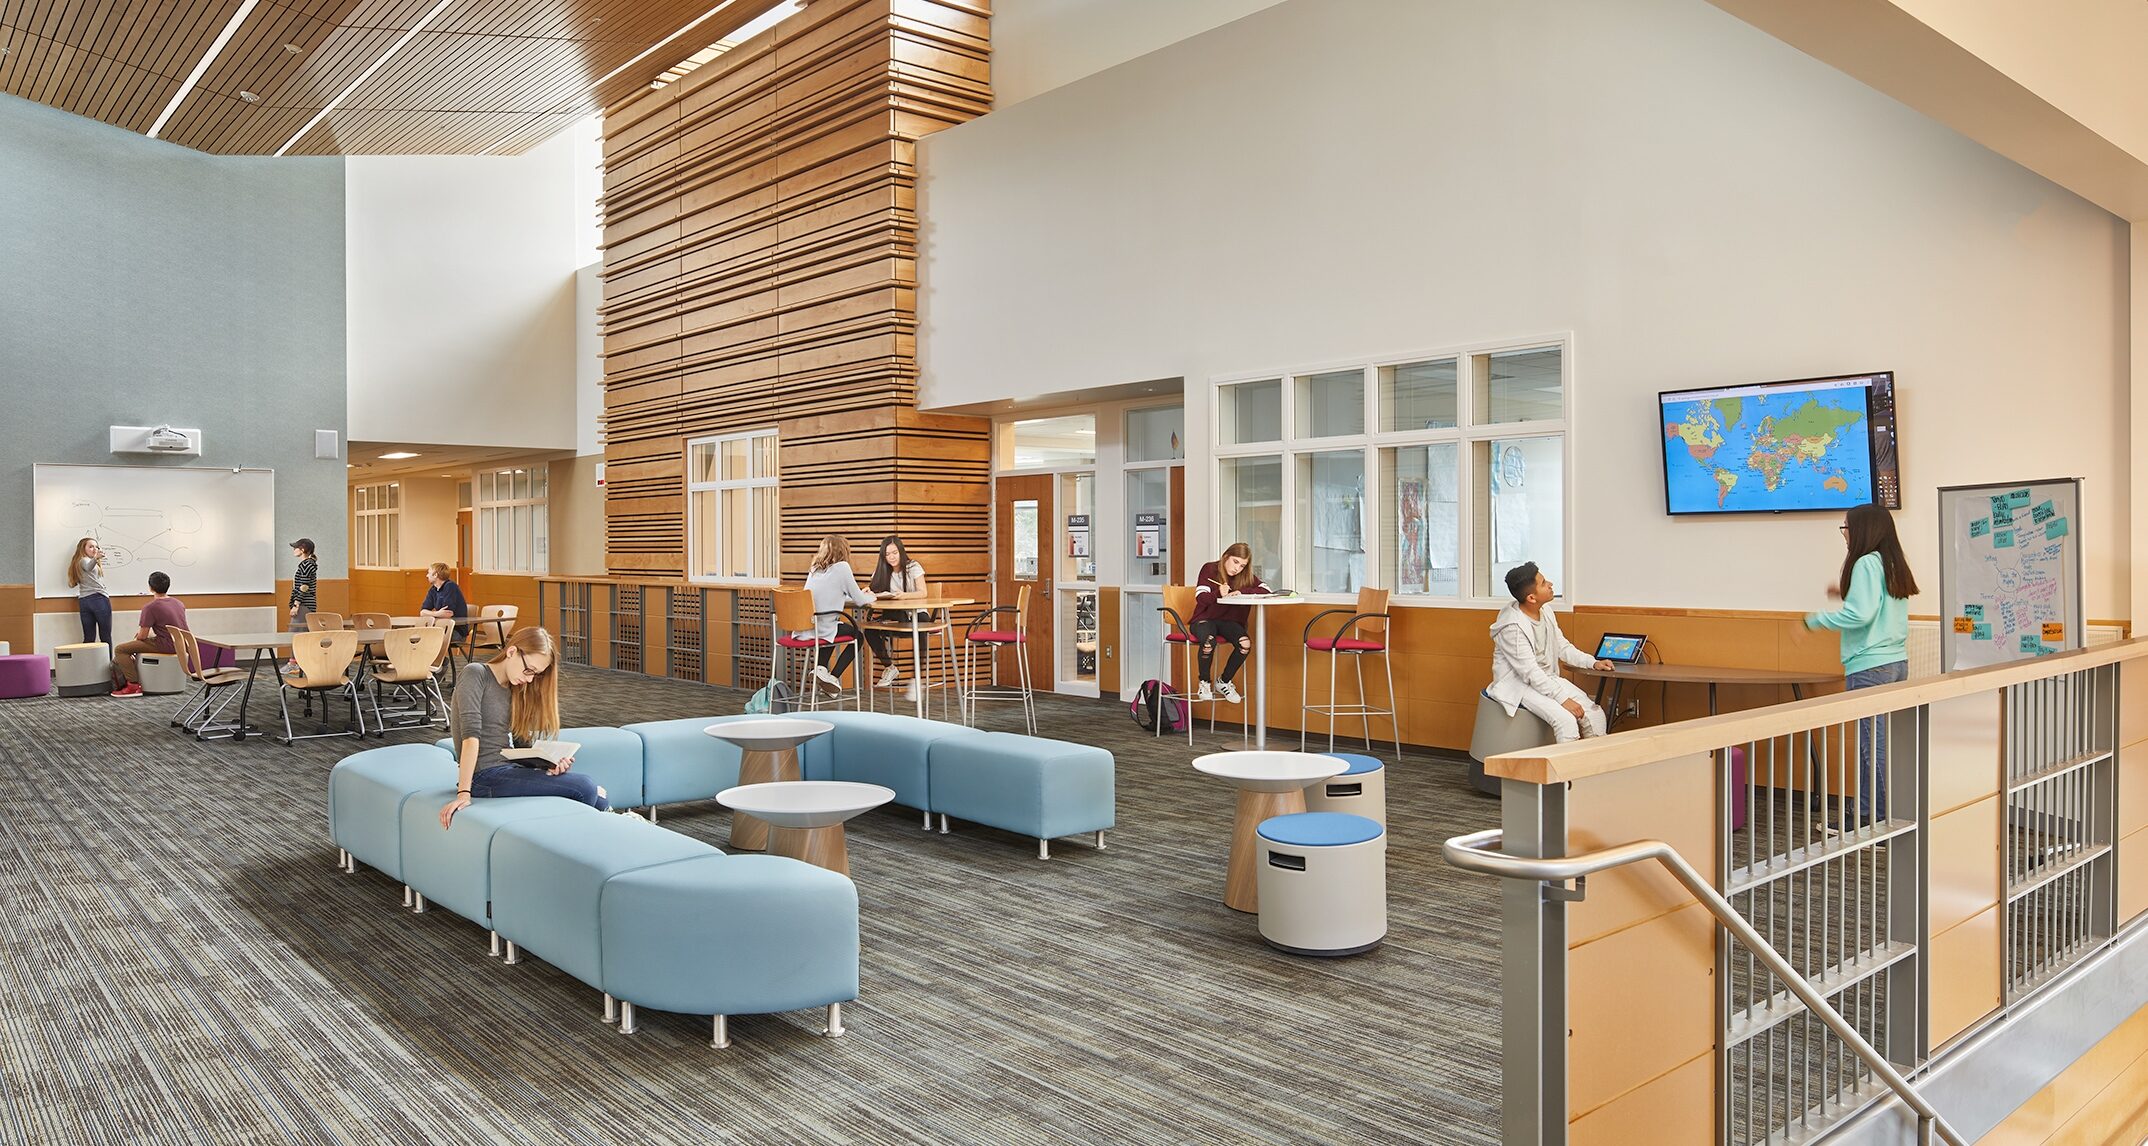 Variety and versatility were key factors when selecting furniture for Renton’s Vera Risdon Middle School. The combination of moveable stools, benches, and desks allow students and teachers to customize shared learning spaces to support various curriculum needs. – NAC Architecture